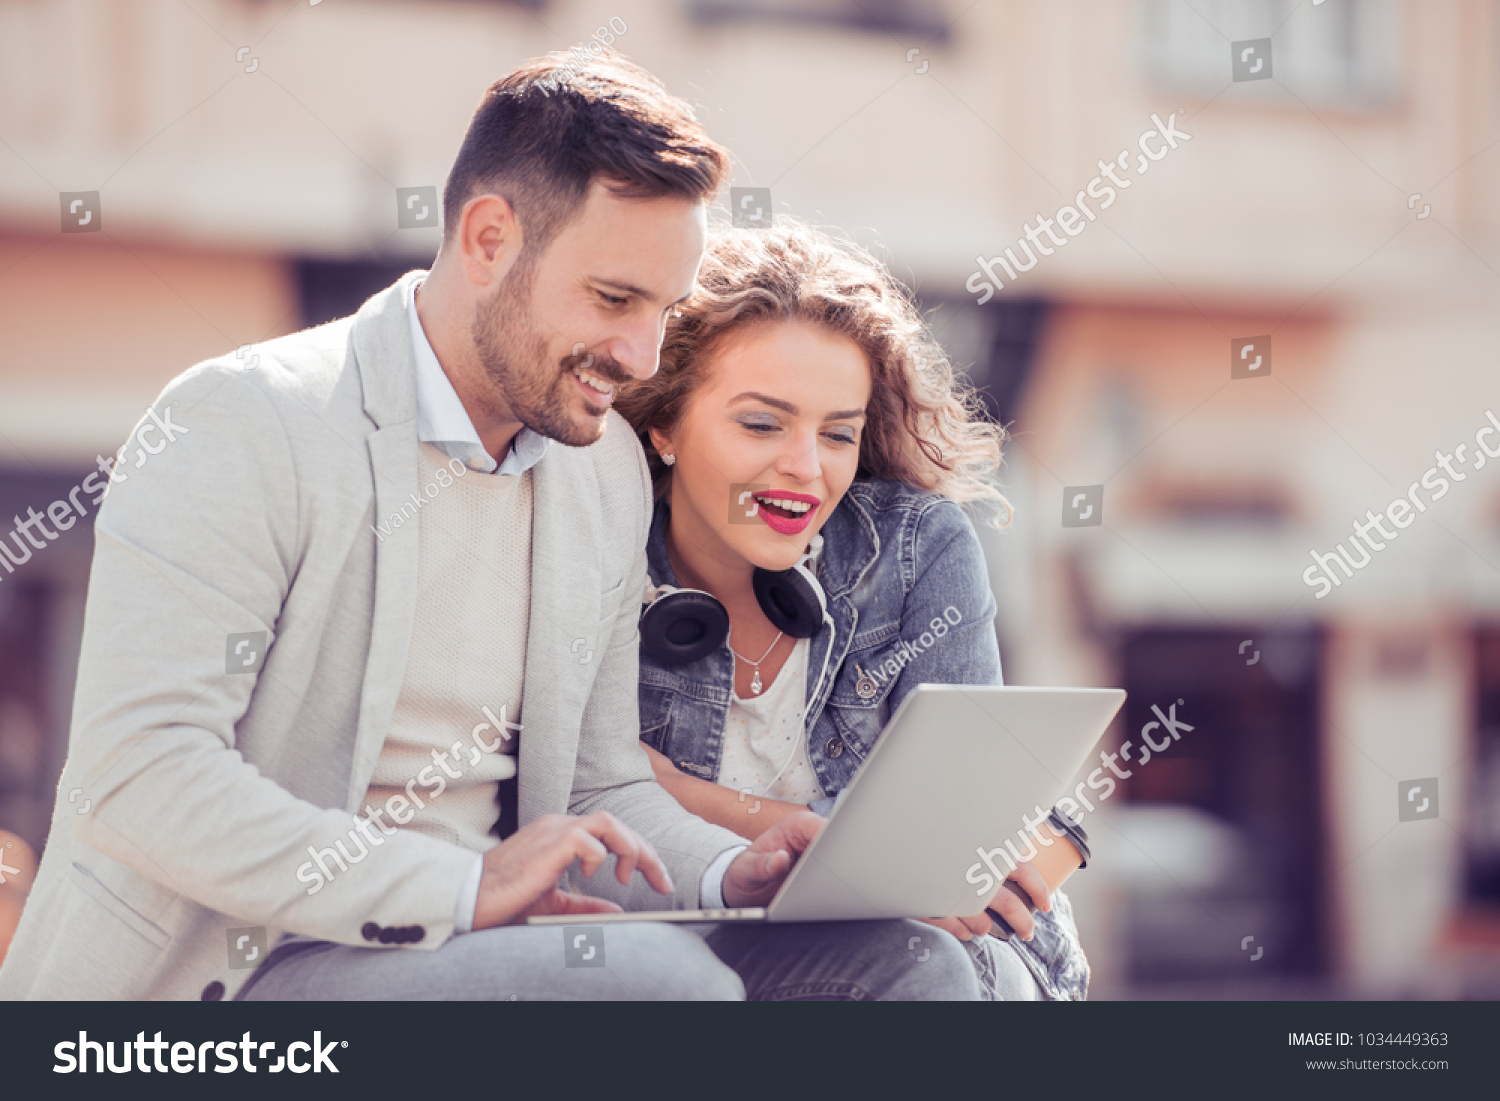 Young couple using a laptop outdoors and looking happy. #1034449363